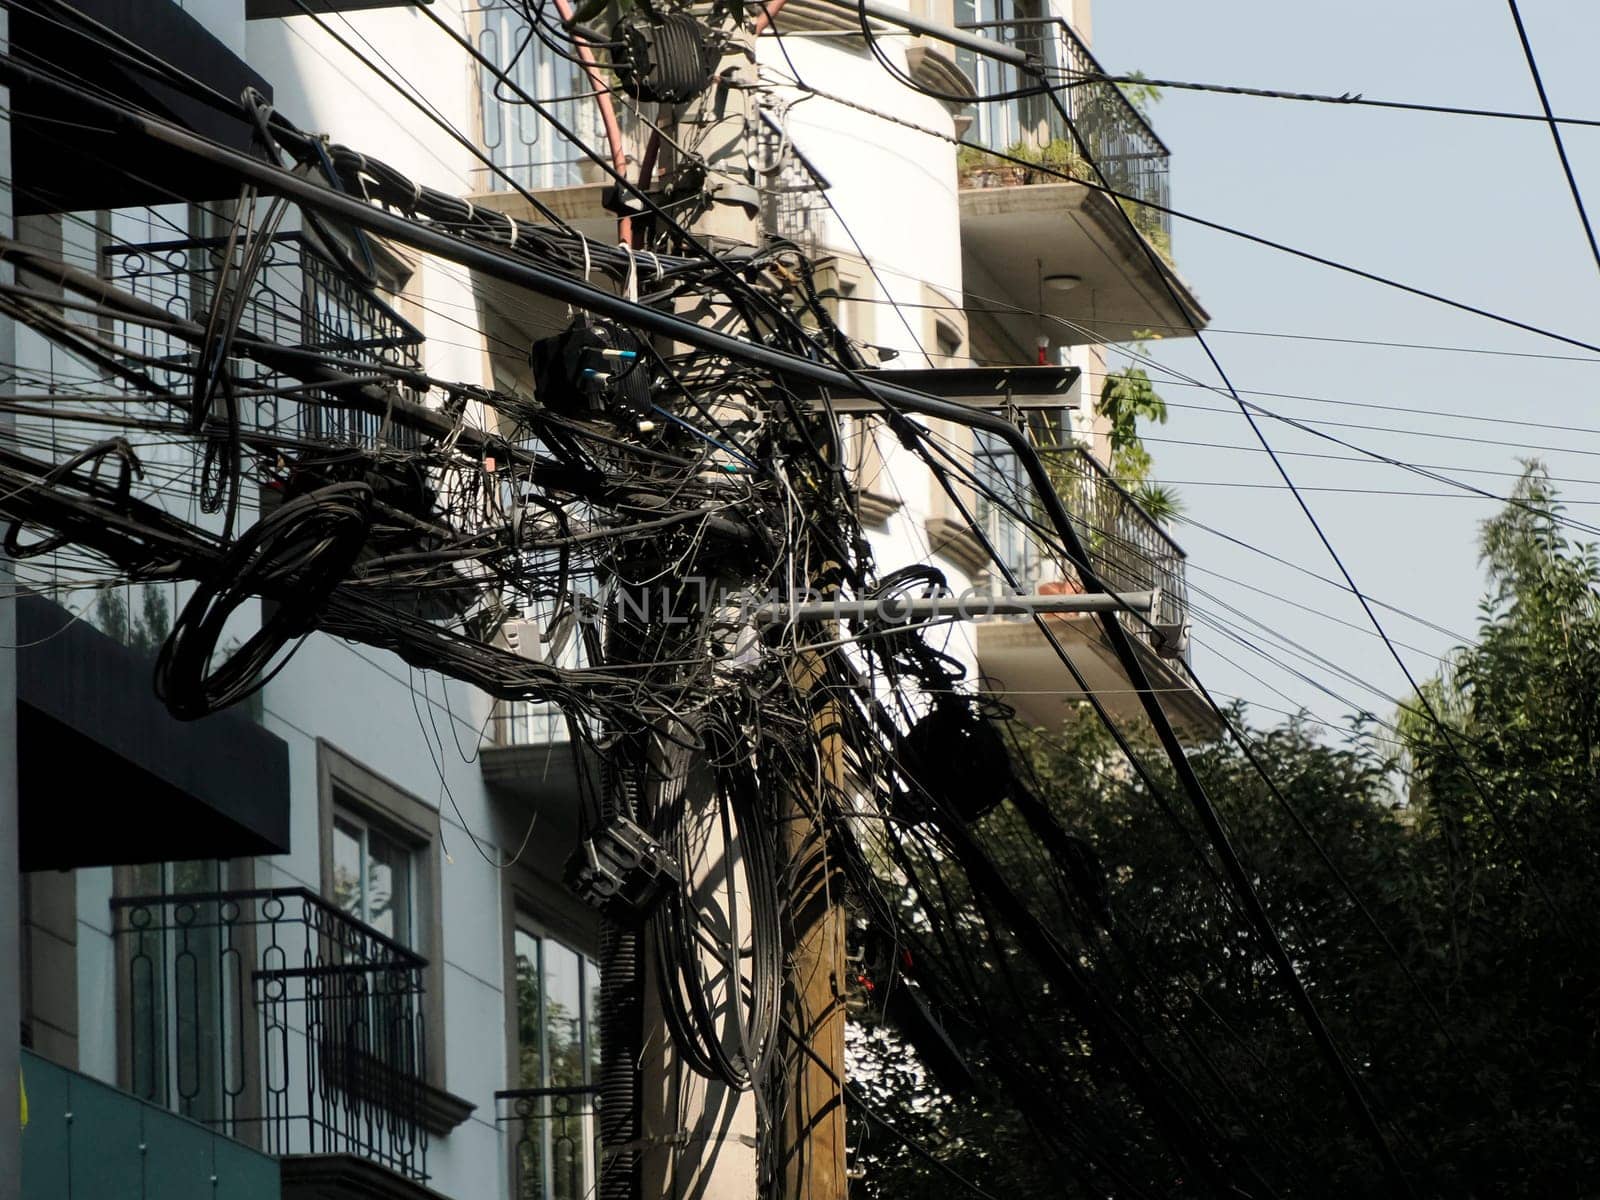 Mexico City Messed up power lines and connection cables. Many tangled wires on electric poles in the city by AndreaIzzotti